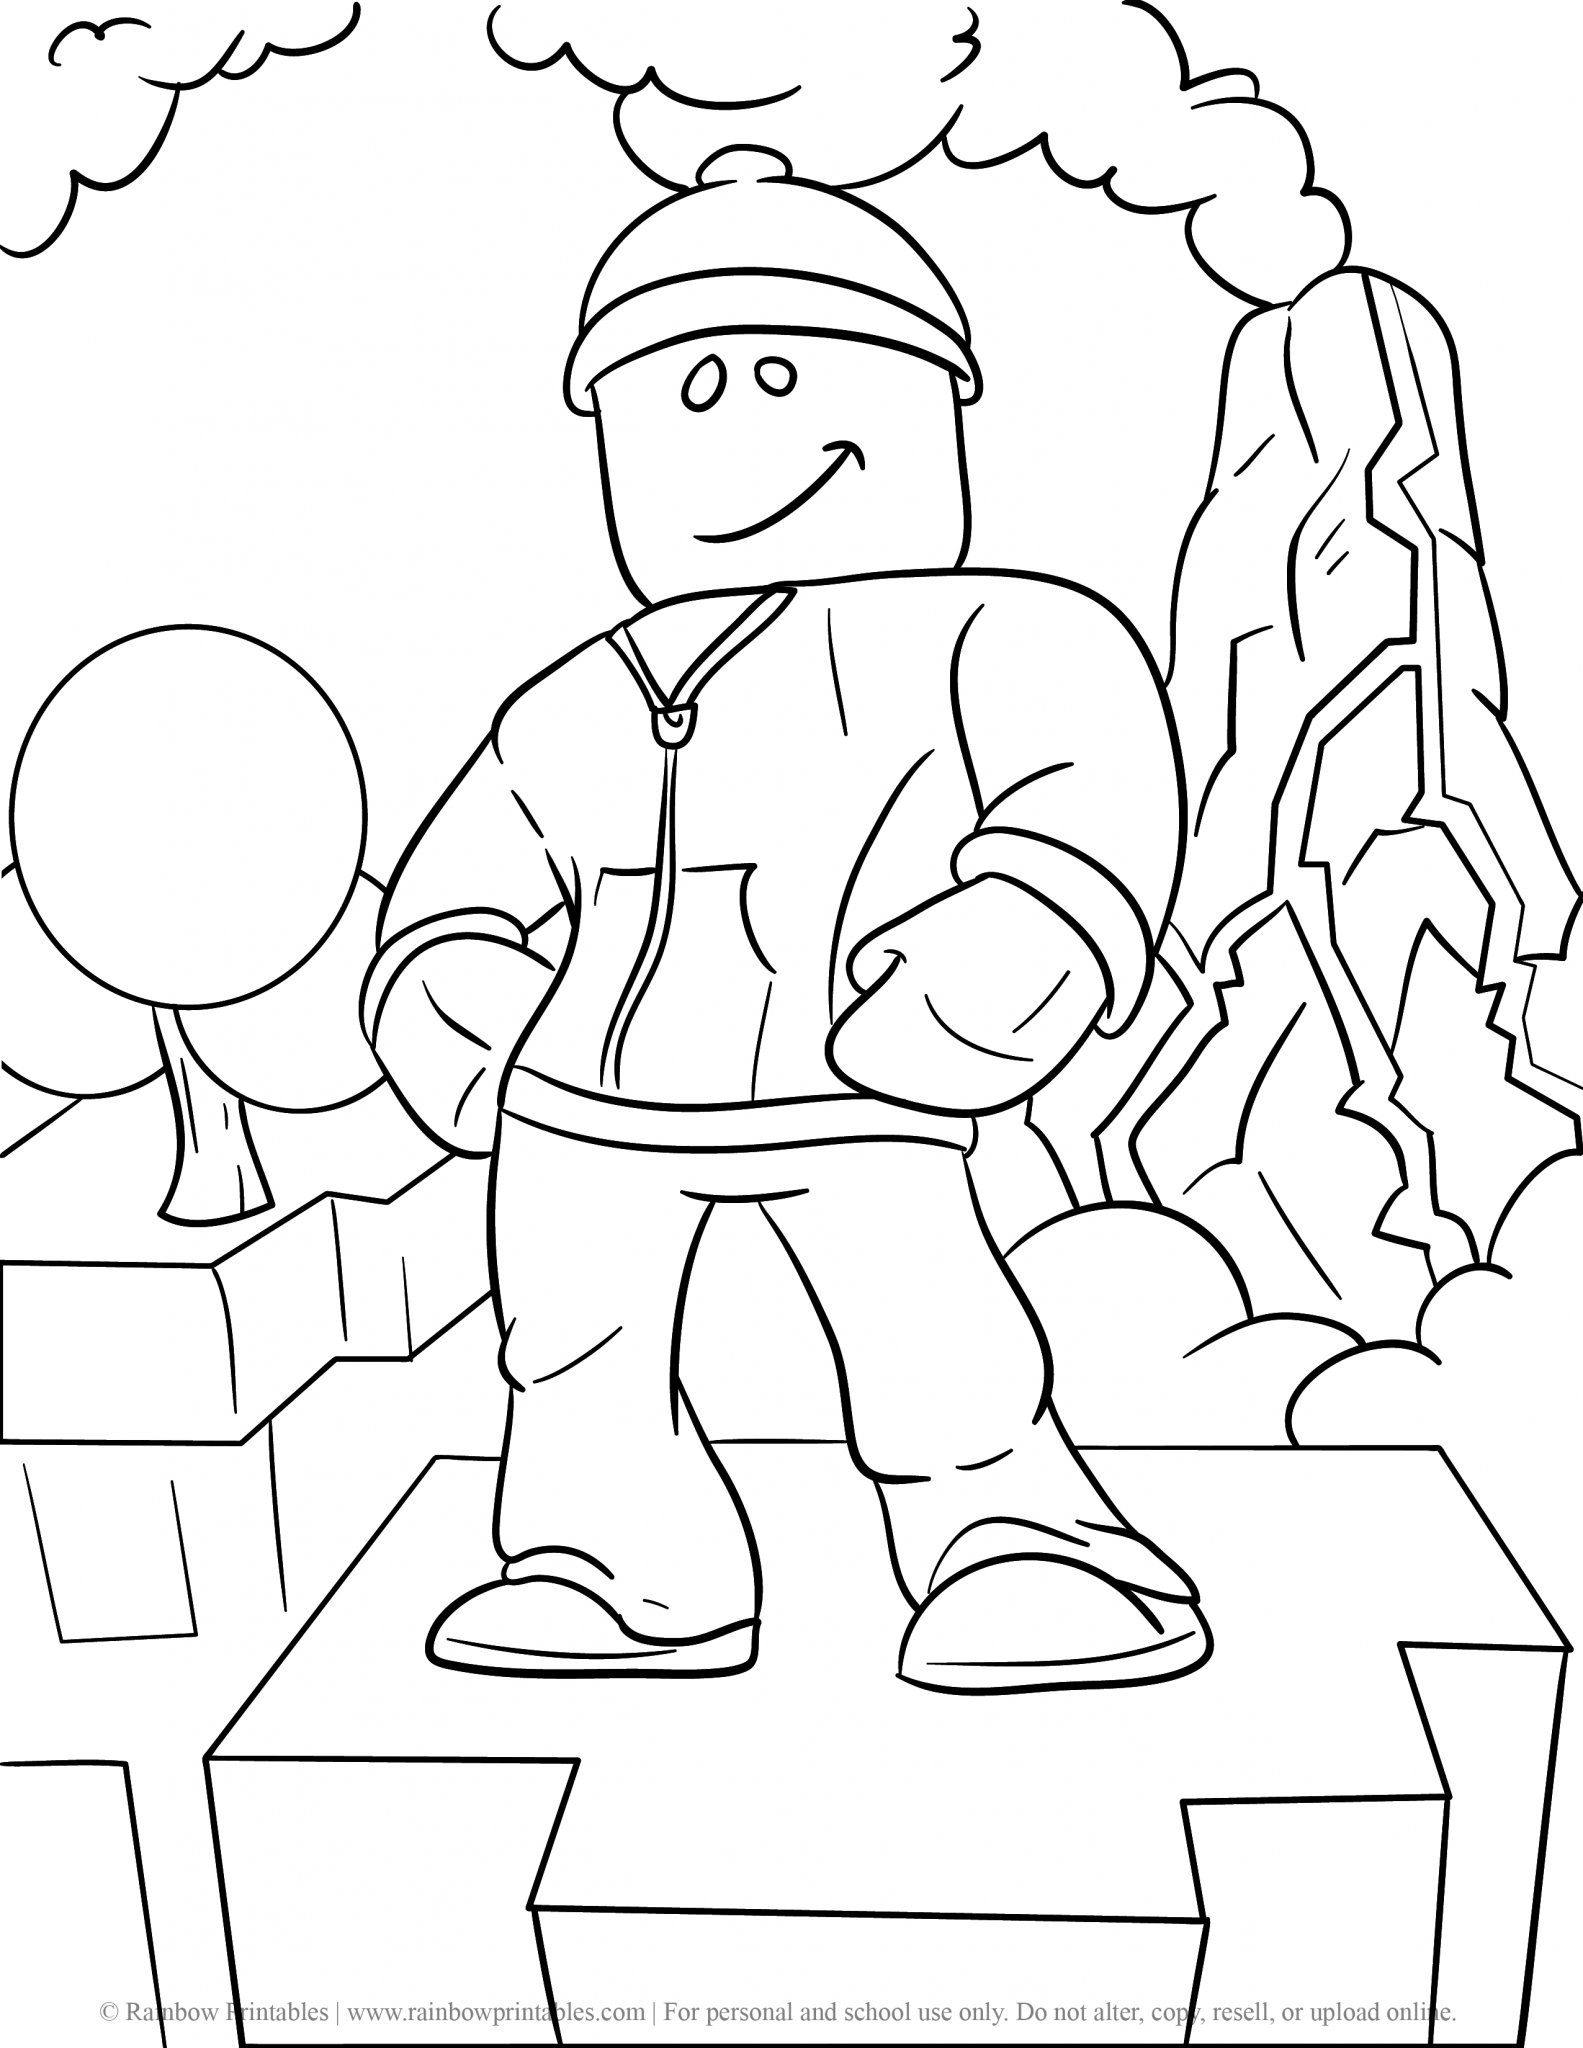 roblox-character-coloring-pages-for-kids-rainbow-printables